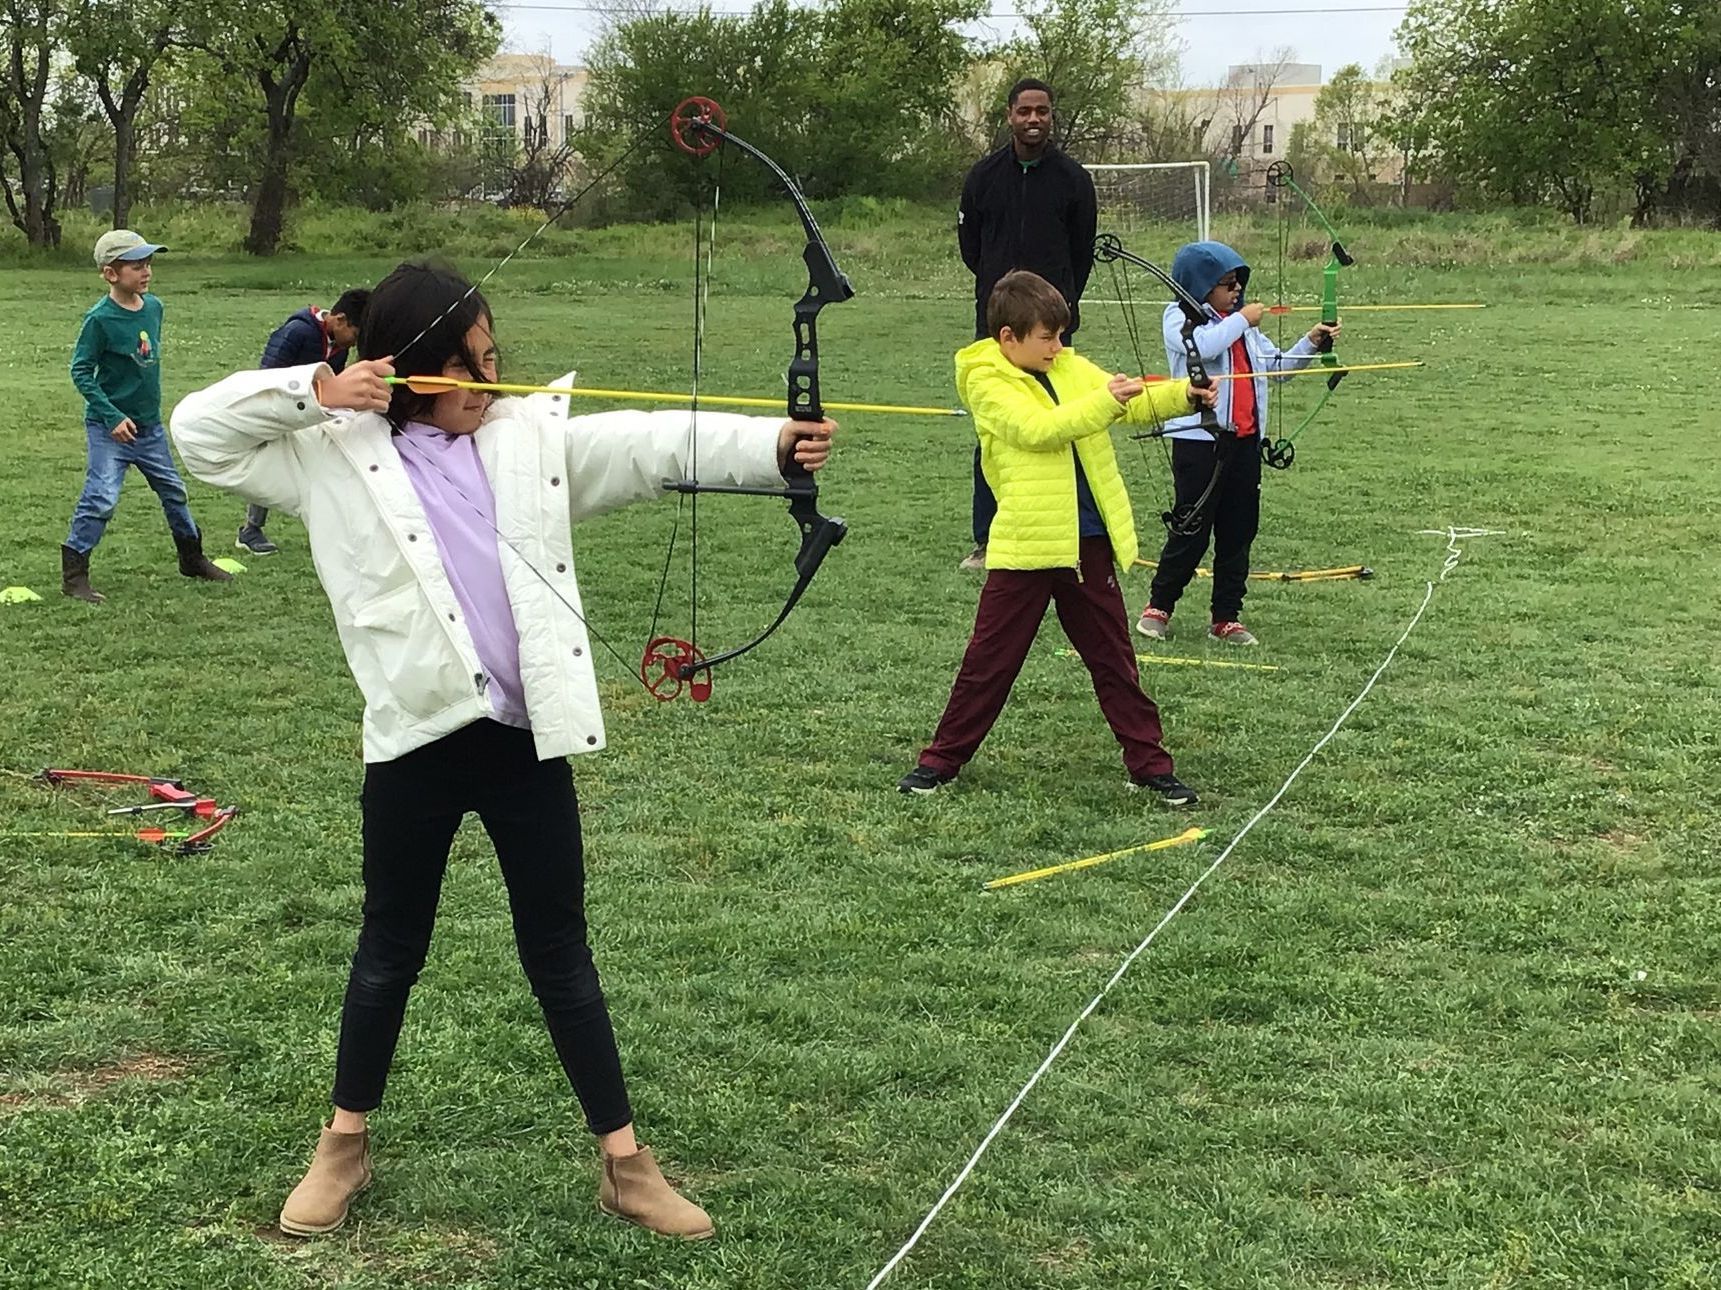 A Montessori group of children are practicing archery in a field